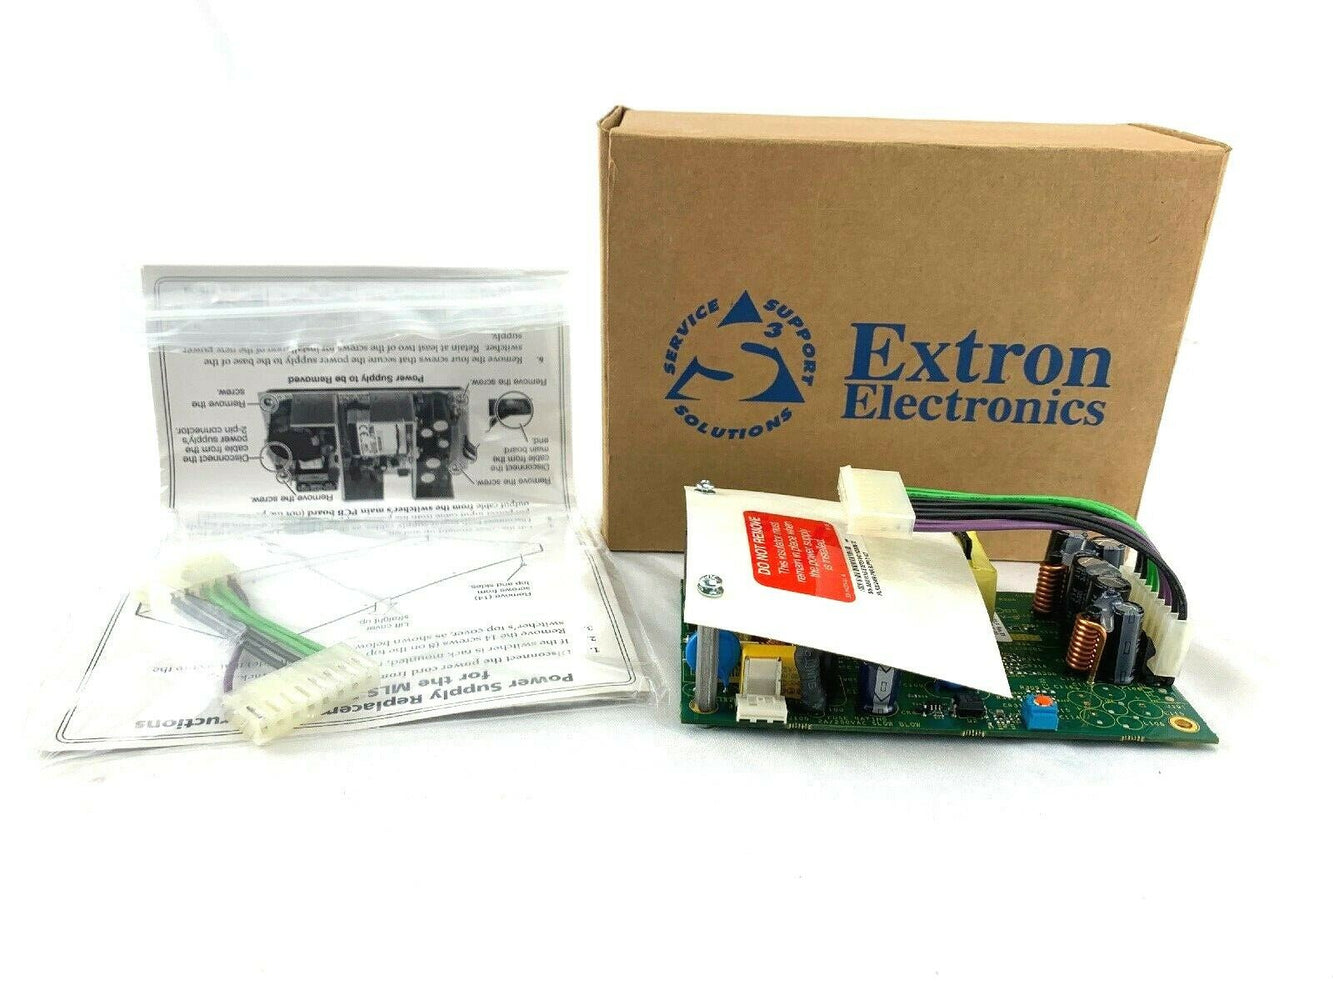 Extron 70-575-04 Power Supply Replacement Kit for Extron MLS304/306/406